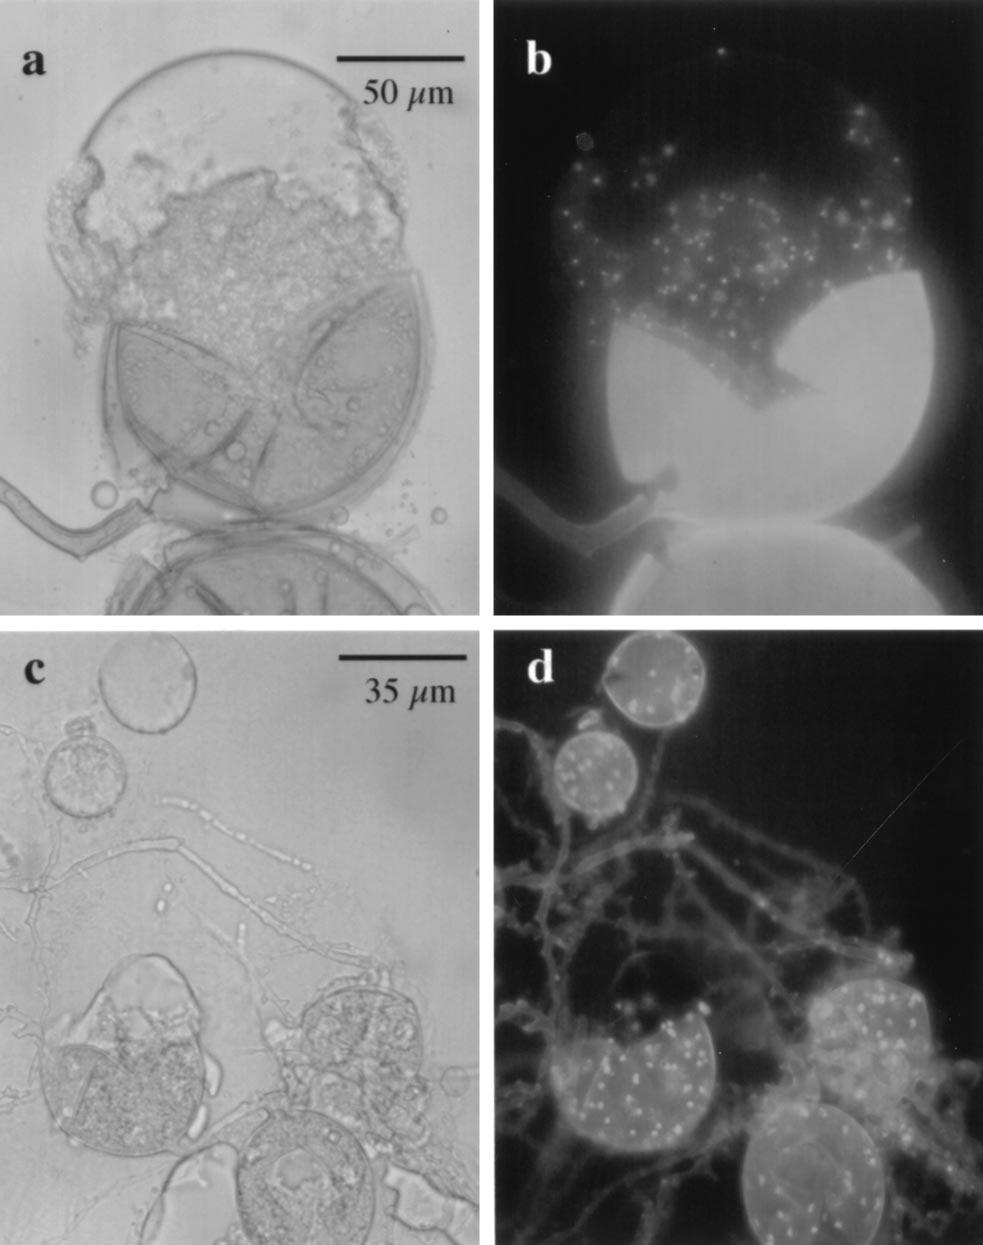 VOL. 68, 2002 TOWARDS GROWTH OF AM FUNGI INDEPENDENT OF A PLANT 1923 FIG. 2. Formation of nuclei in daughter spores of G. intraradices. (a) A mother spore of G.